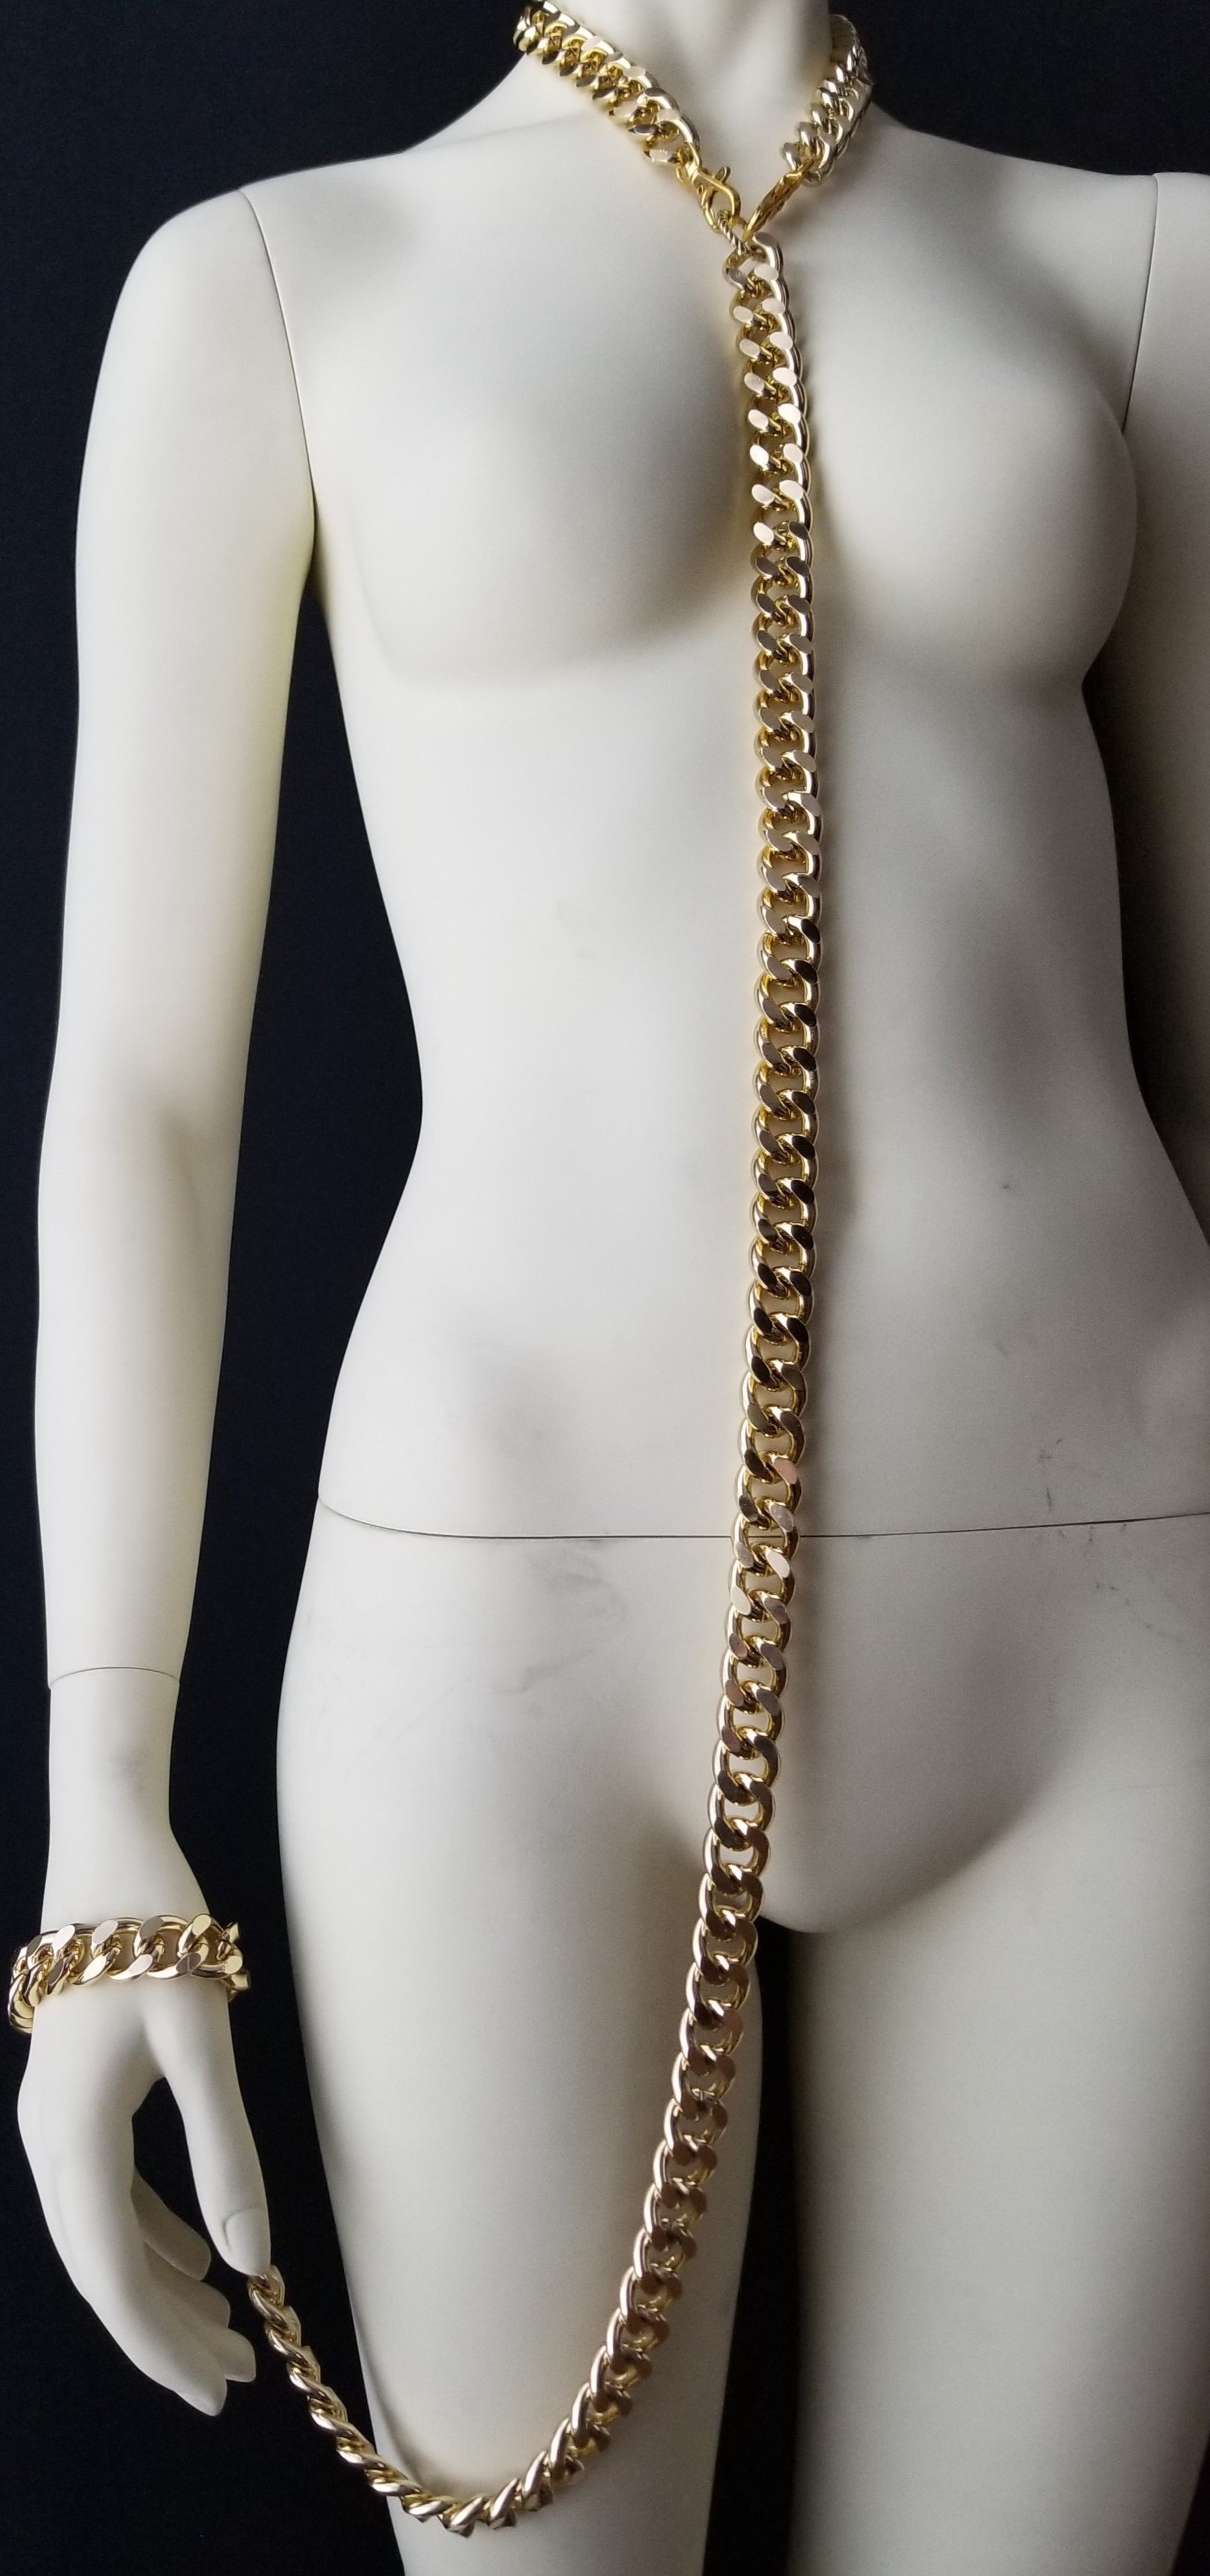 Shop FWHLR bodychains, jewelry and accessories. This BDSM inspired Leash for women or men is designed to make a statement. Fetishwear , bondage, kink culture inspired this high fashion design. 